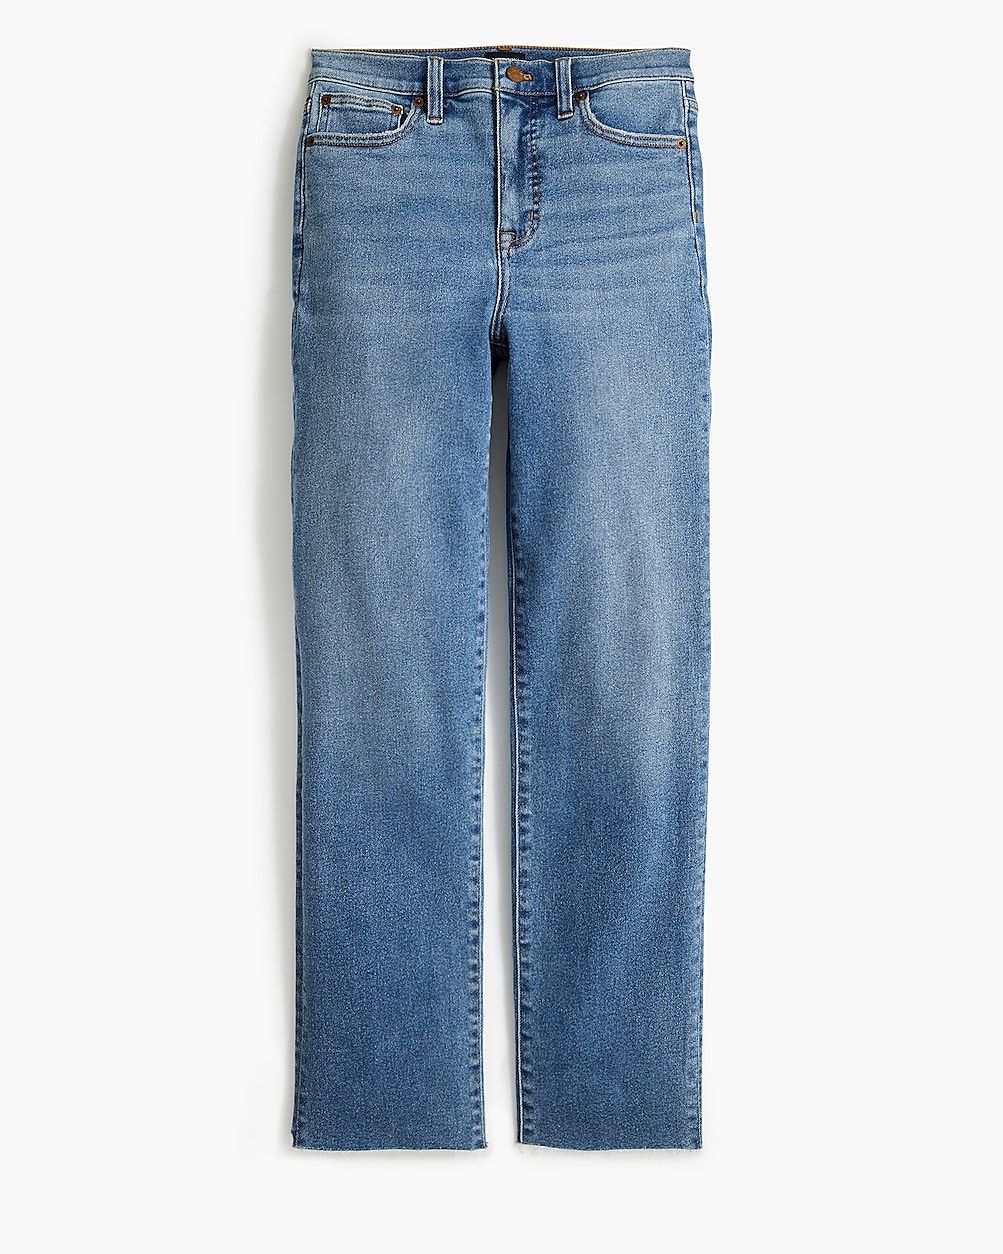 Petite stovepipe straight jean in signature stretch+ | J.Crew Factory